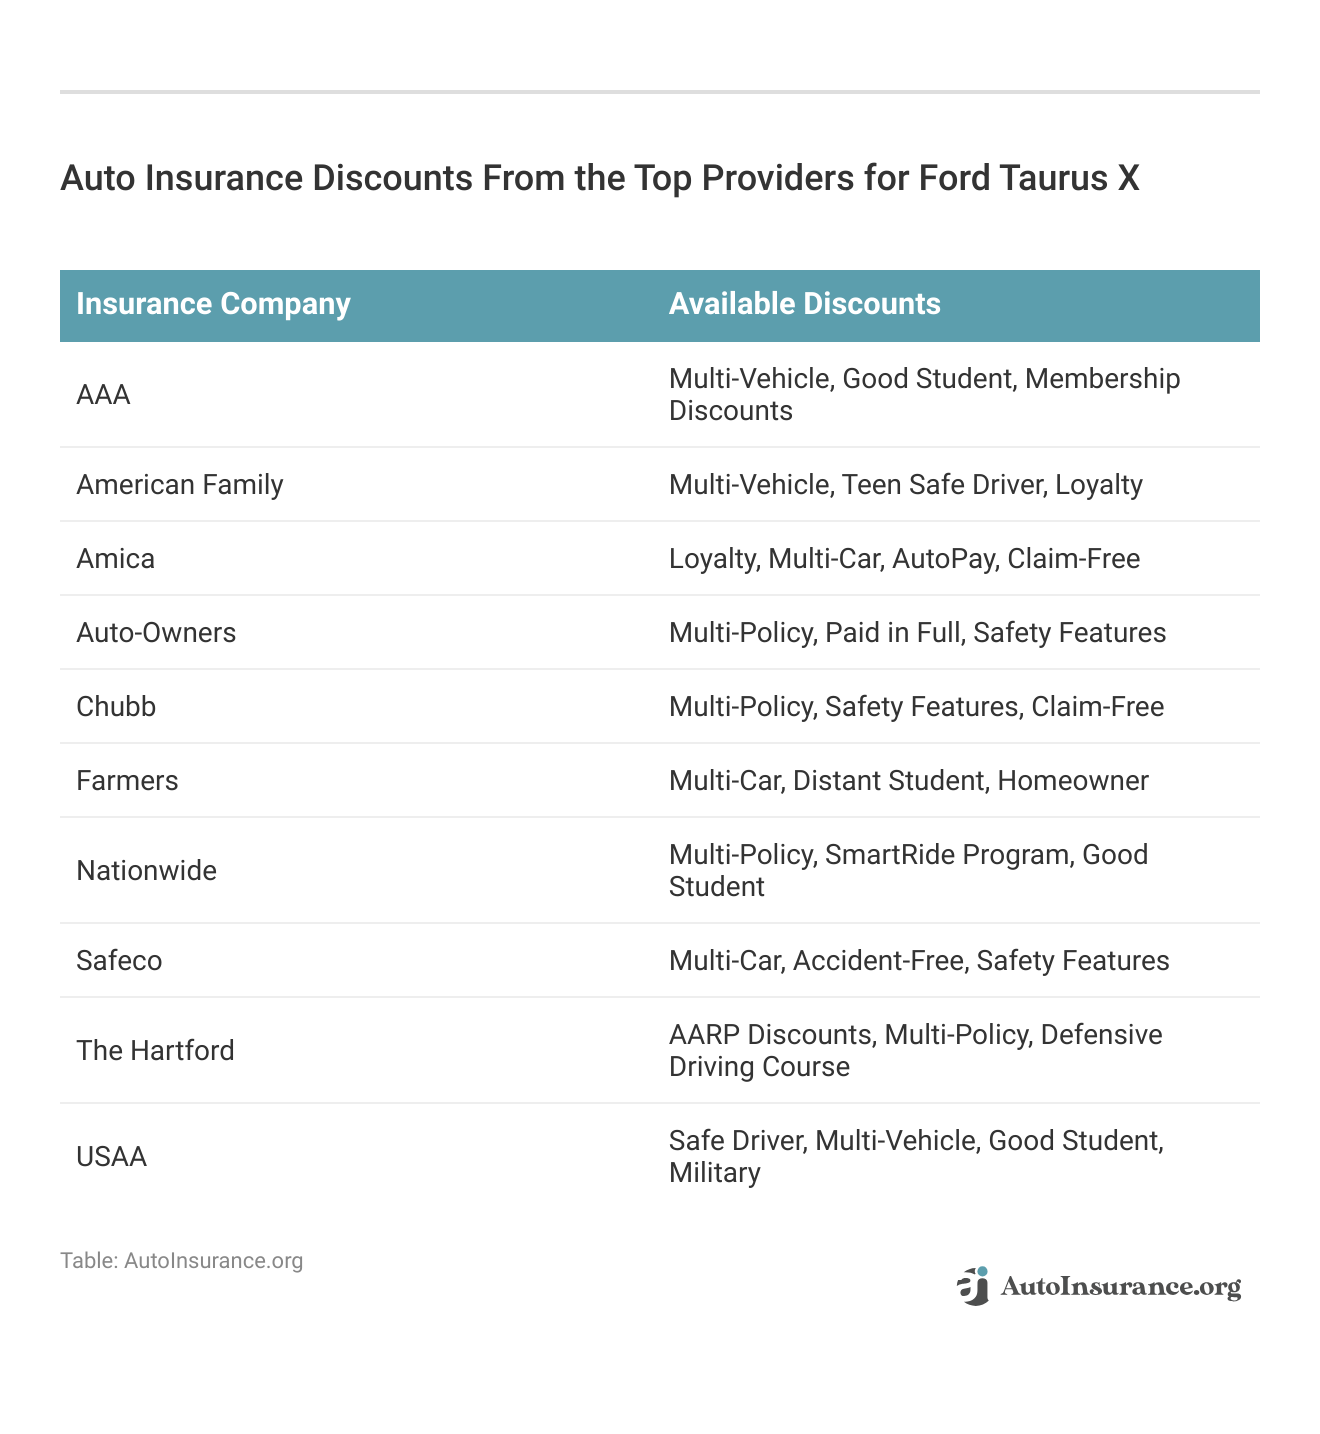 <h3>Auto Insurance Discounts From the Top Providers for Ford Taurus X</h3>